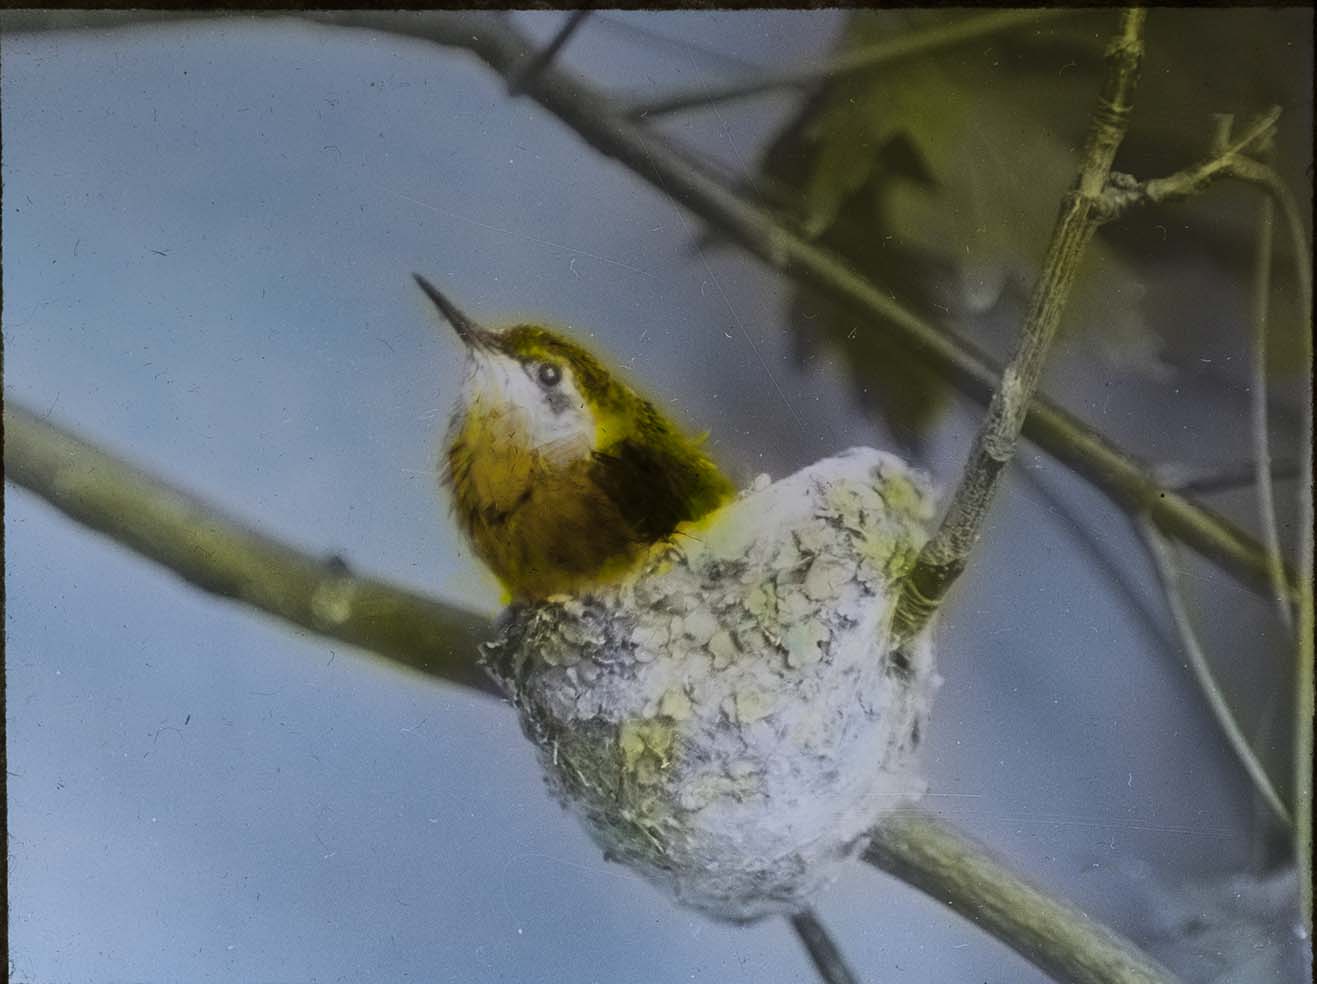 Lantern slide and photograph of a Ruby-throated Hummingbird in a nest